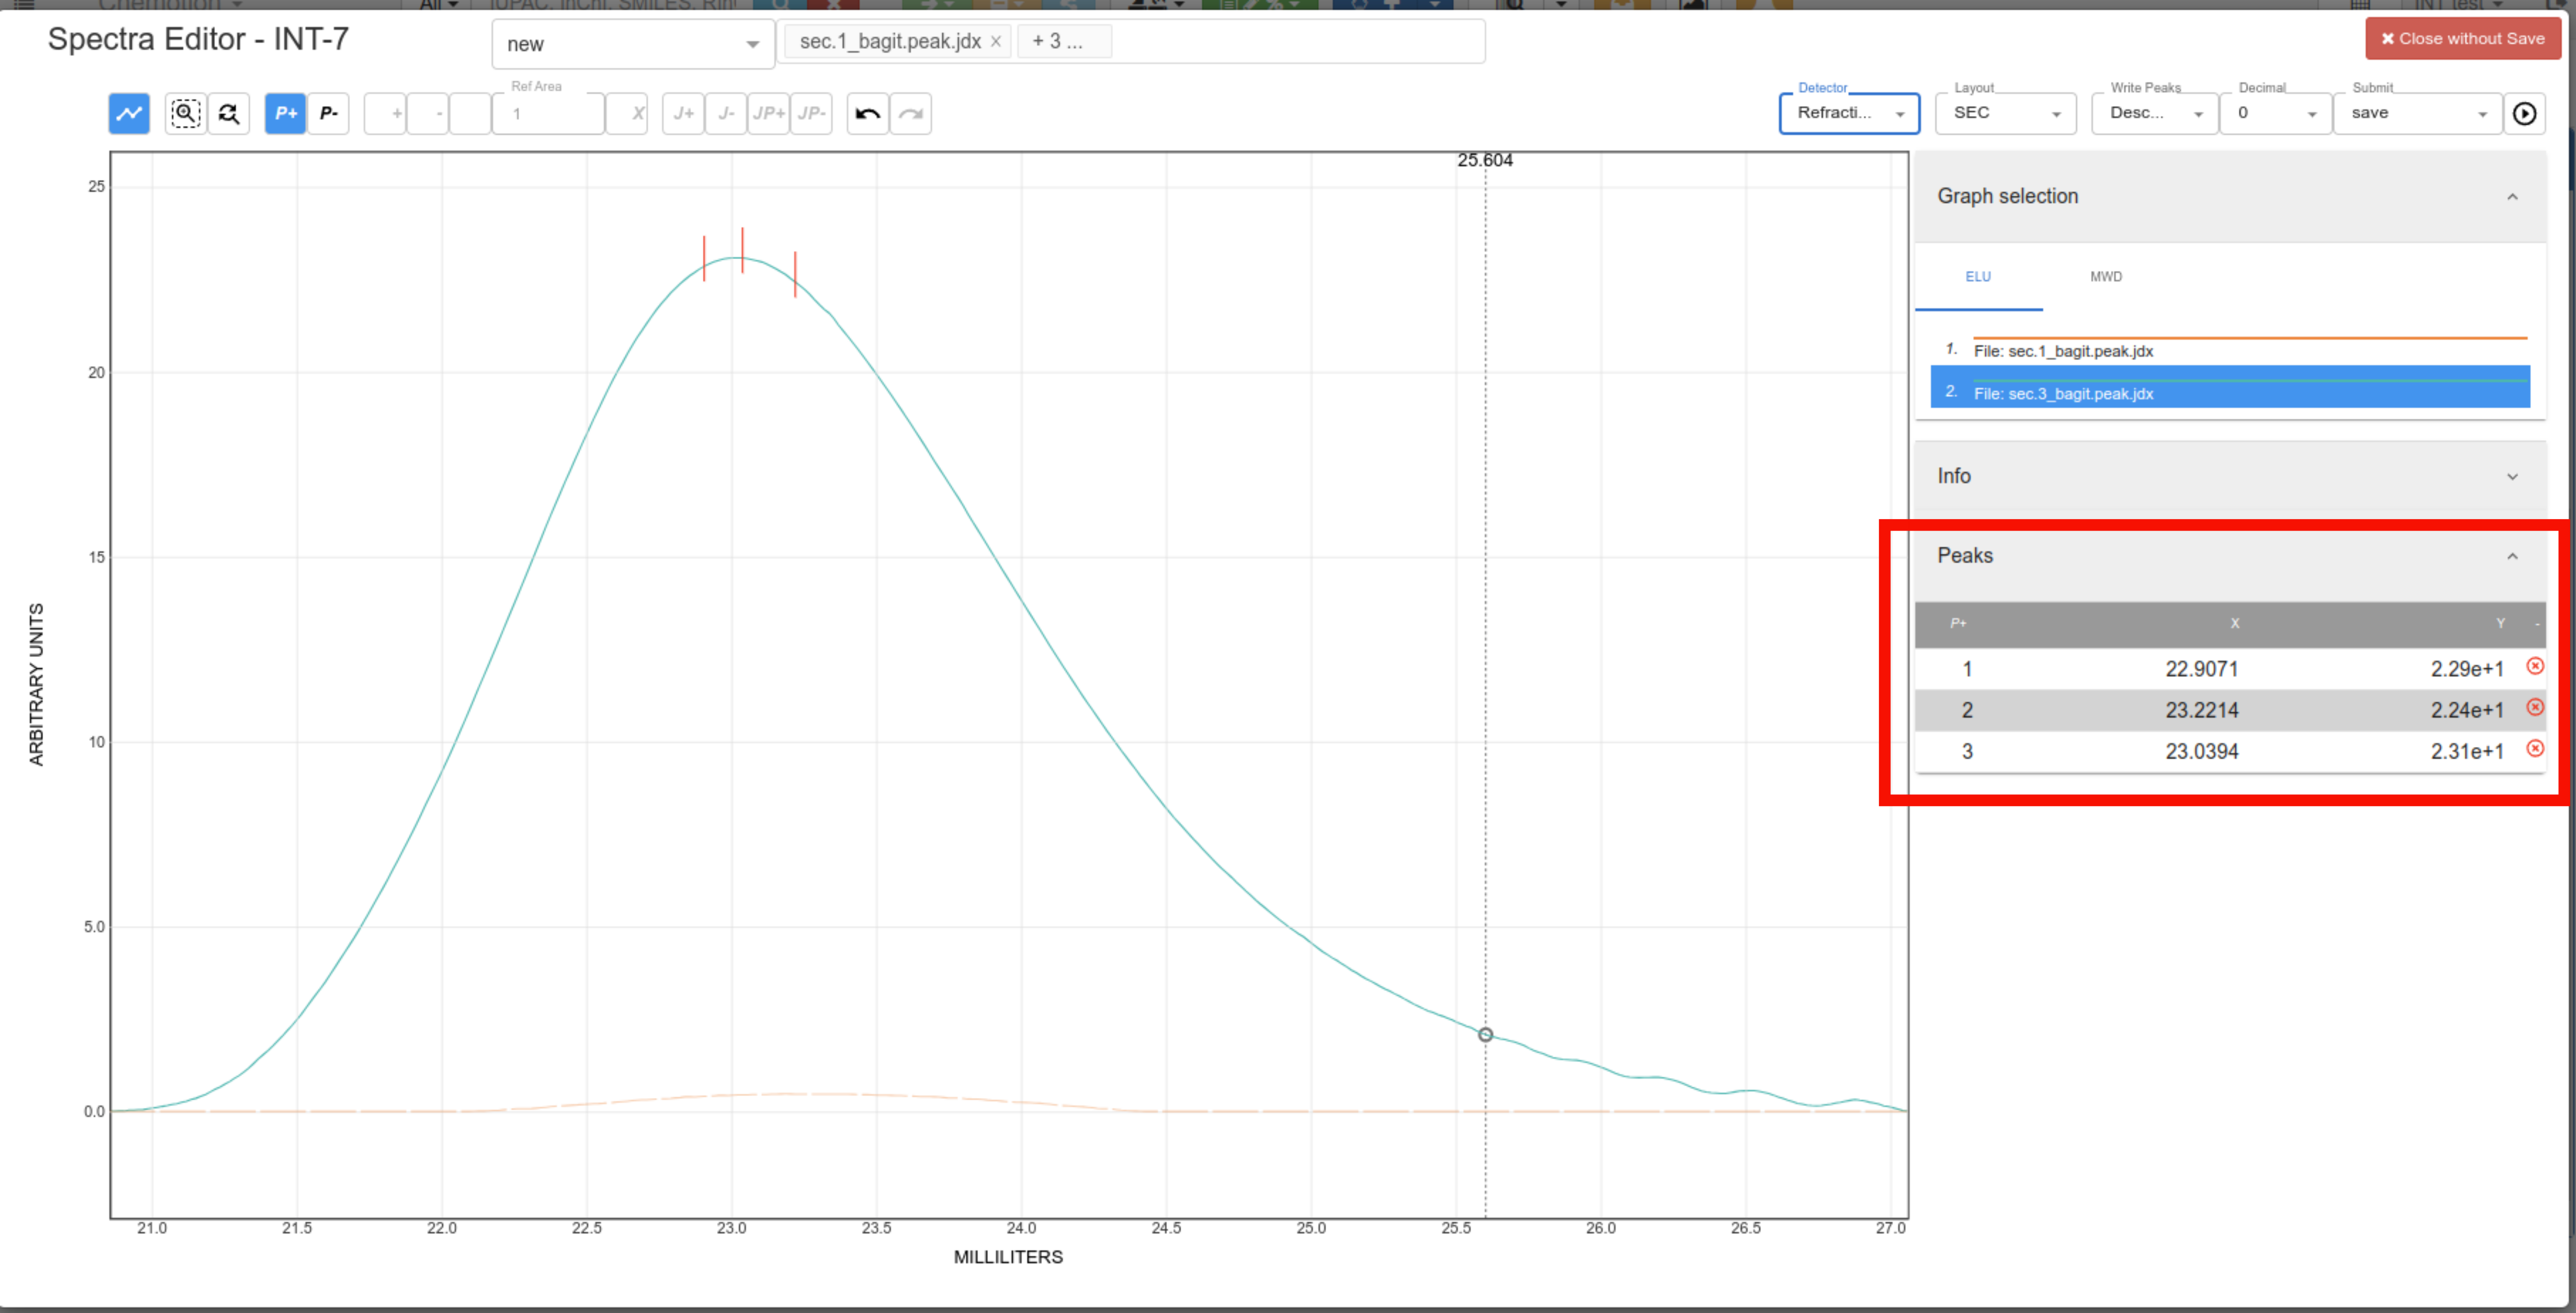 chemspectra selected sec curve